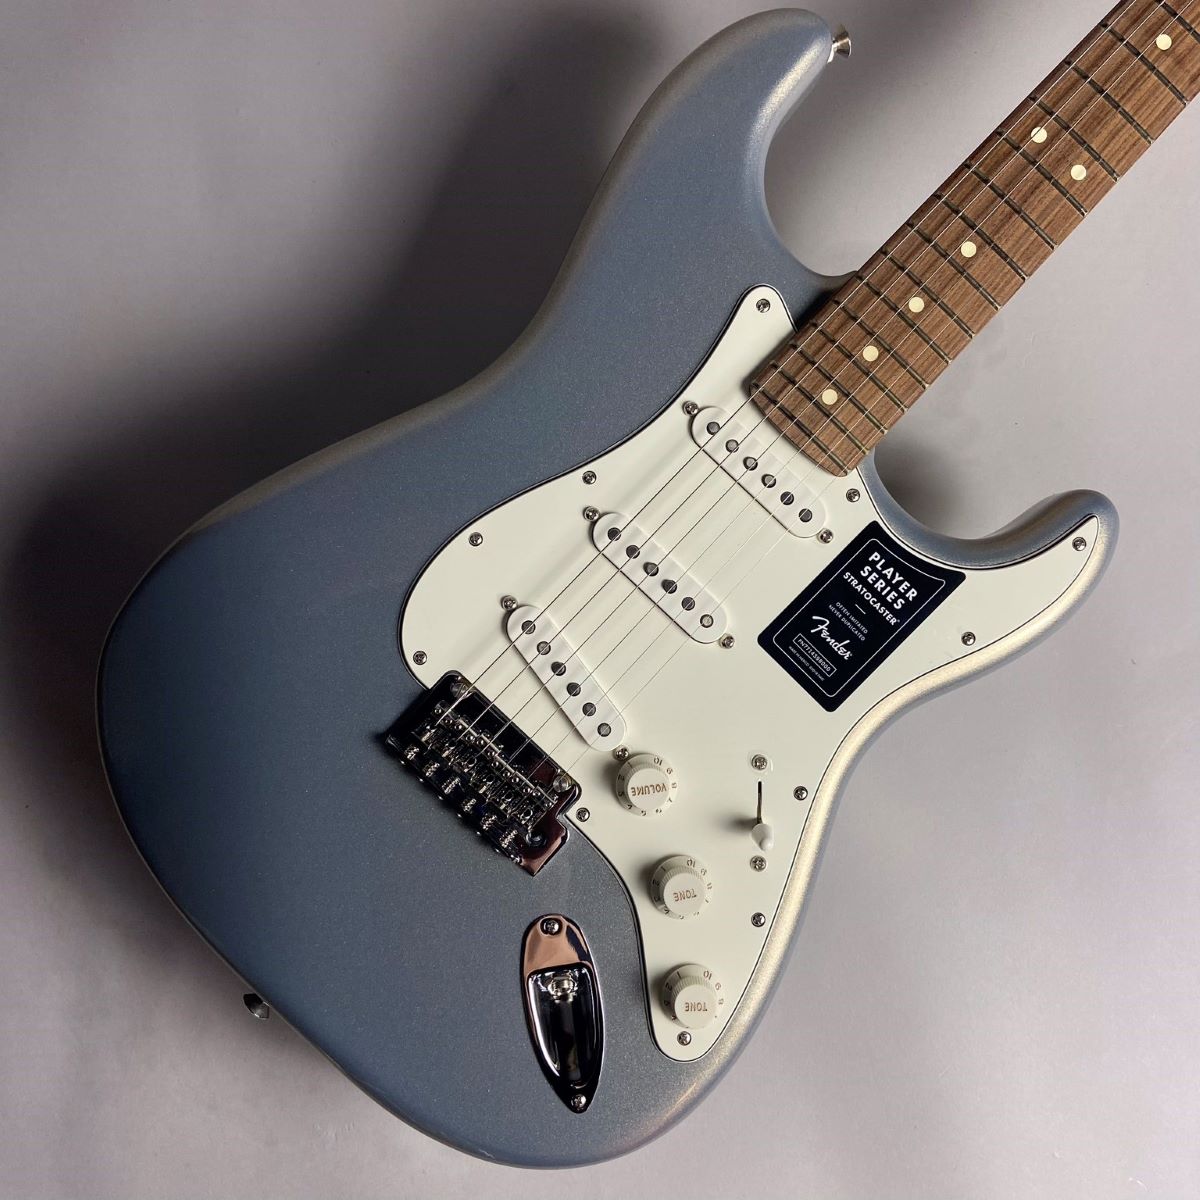 Player　StratocasterR,　Silver　ギター　FENDER　フェンダーエレキギター